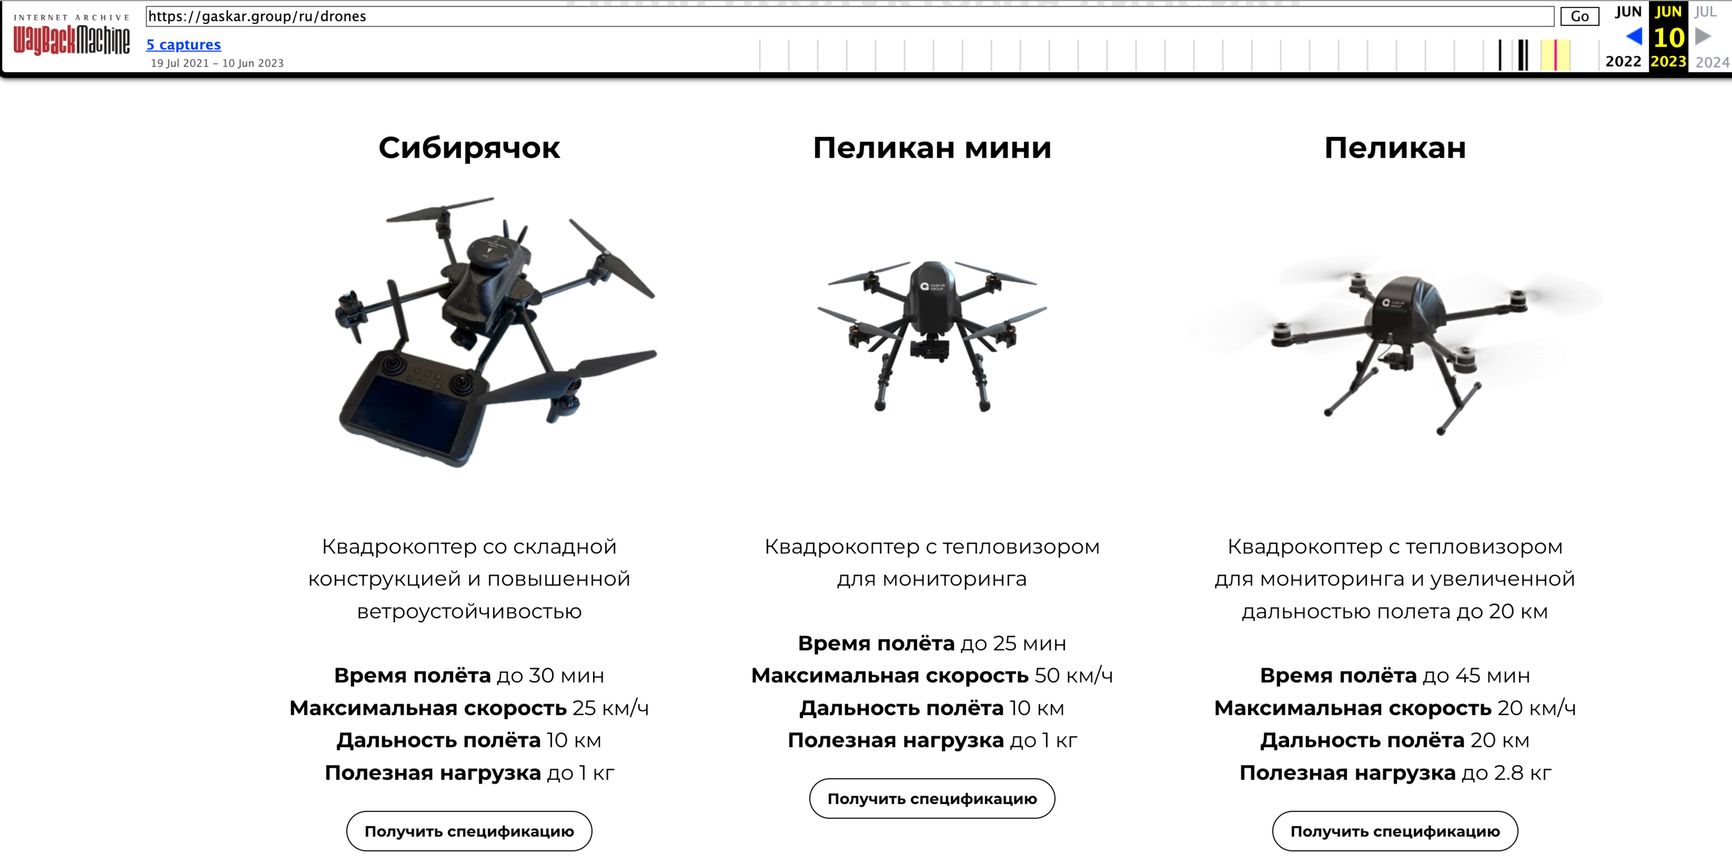 An archived copy of the Gaskar Group website dated June 10, 2023. From left to right: Sibiryachok, Pelican Mini, Pelican